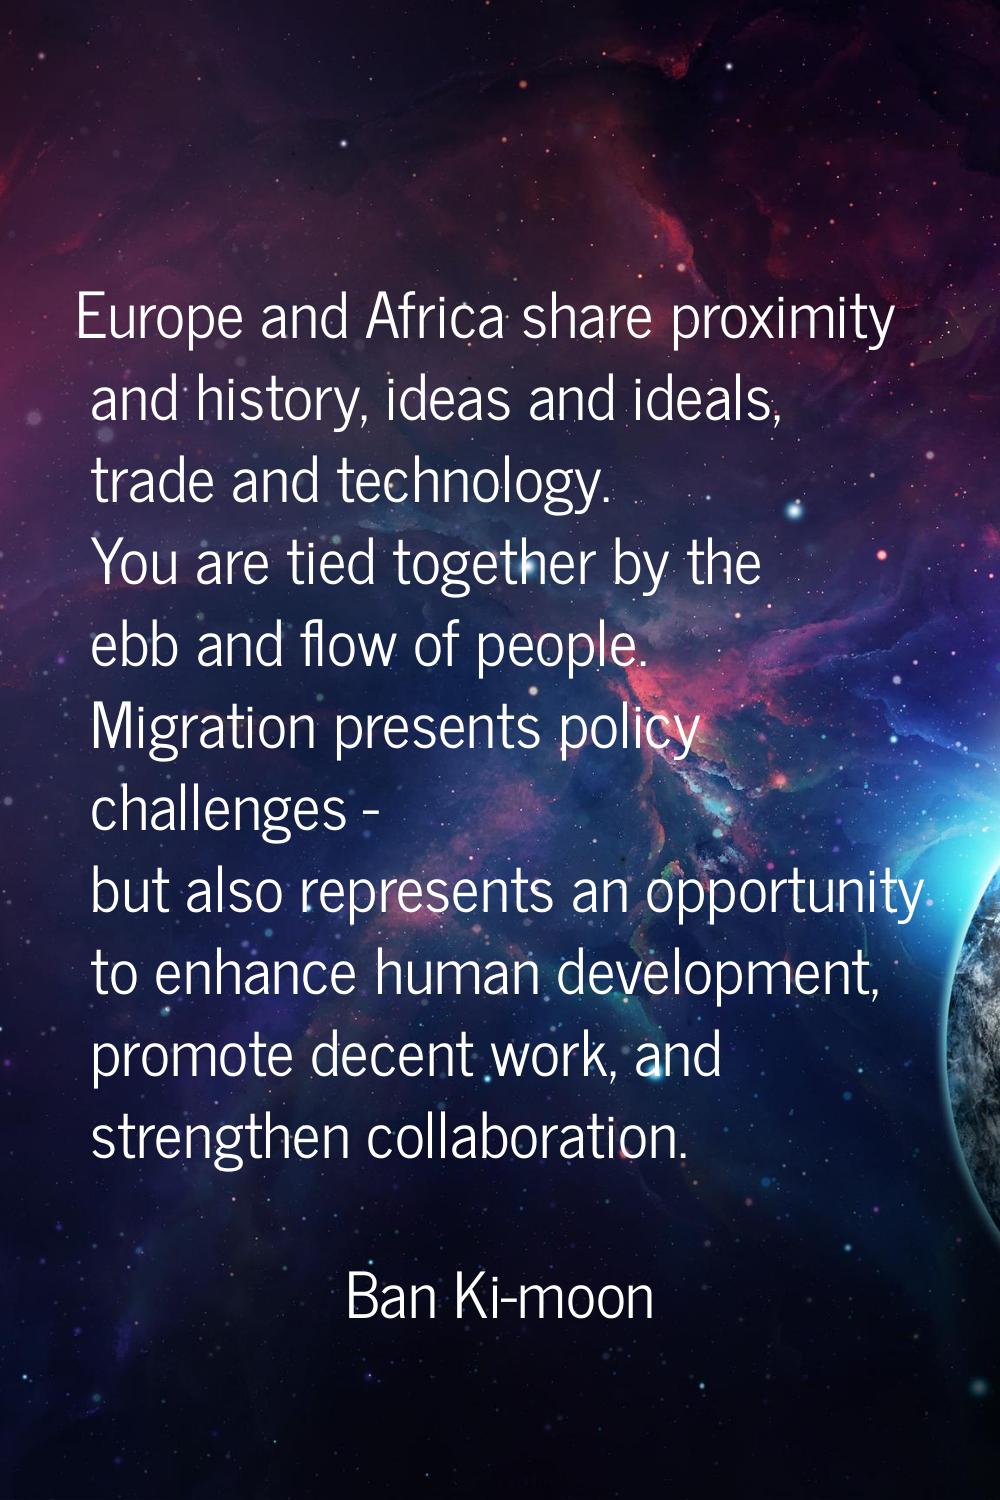 Europe and Africa share proximity and history, ideas and ideals, trade and technology. You are tied